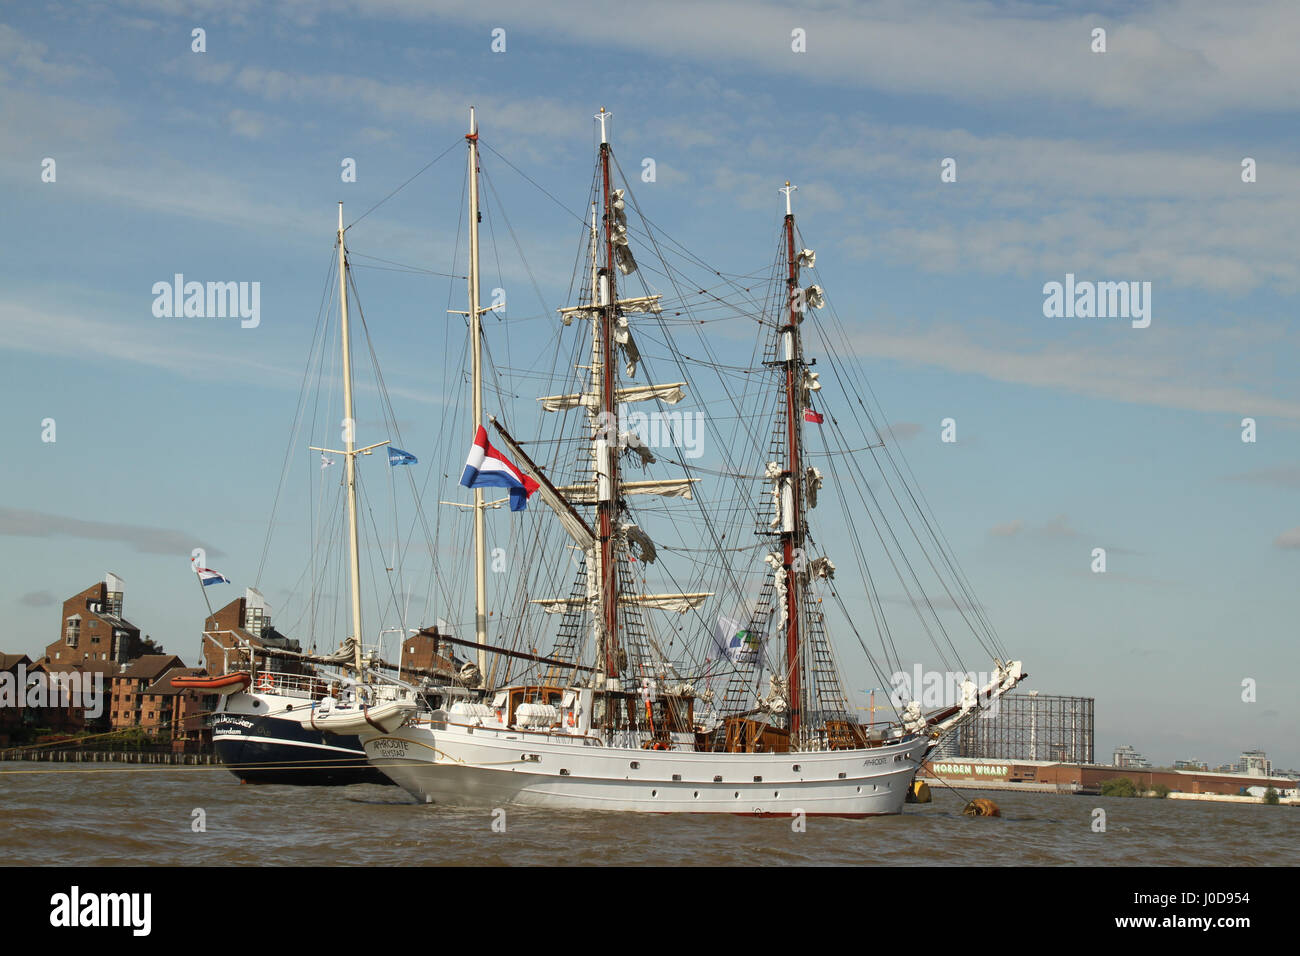 London, UK. 12th Apr, 2017. London, United Kingdom - April 12: Pedro Doncker and Aphrodite docked at Greenwich ahead of the 2017 Tall Ship Regatta. Over the Easter weekend, around 40 Tall Ships are scheduled to sail the river Thames to Greenwich, marking the 150th anniversary of the Canadian Confederation. The ships will be anchored at the Maritime Greenwich UNESCO World Heritage Site in Greenwich town centre, and at the Royal Arsenal Riverside in Woolwich before they sail to Quebec, Canada, via Portugal, Bermuda and Boston. Credit: David Mbiyu/Alamy Live News Stock Photo